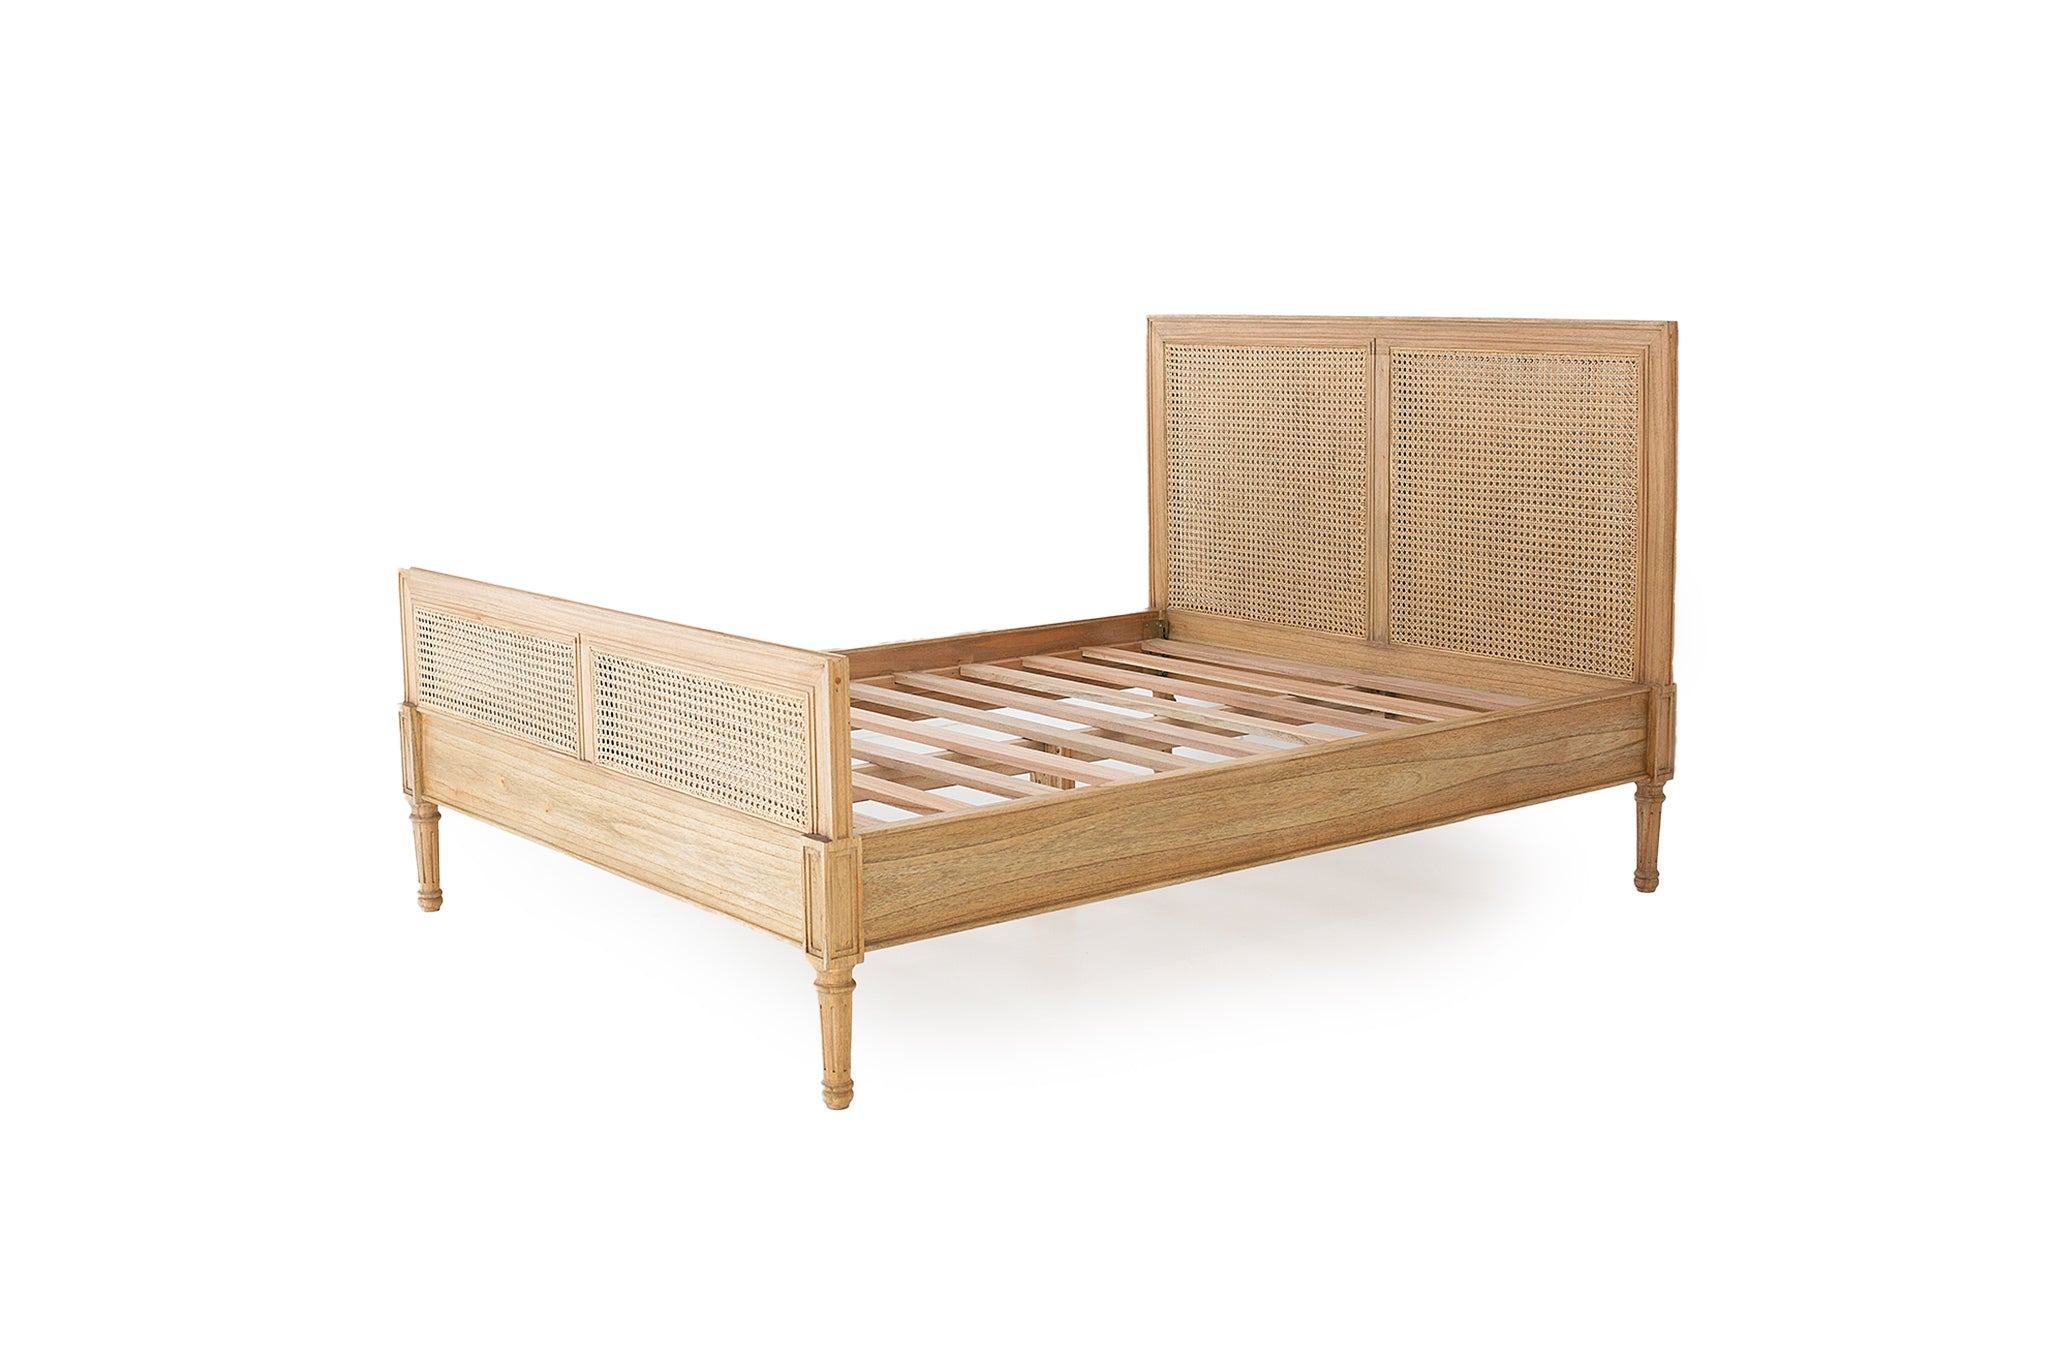 Vaucluse Cane Bed – Queen Size – Weathered Oak